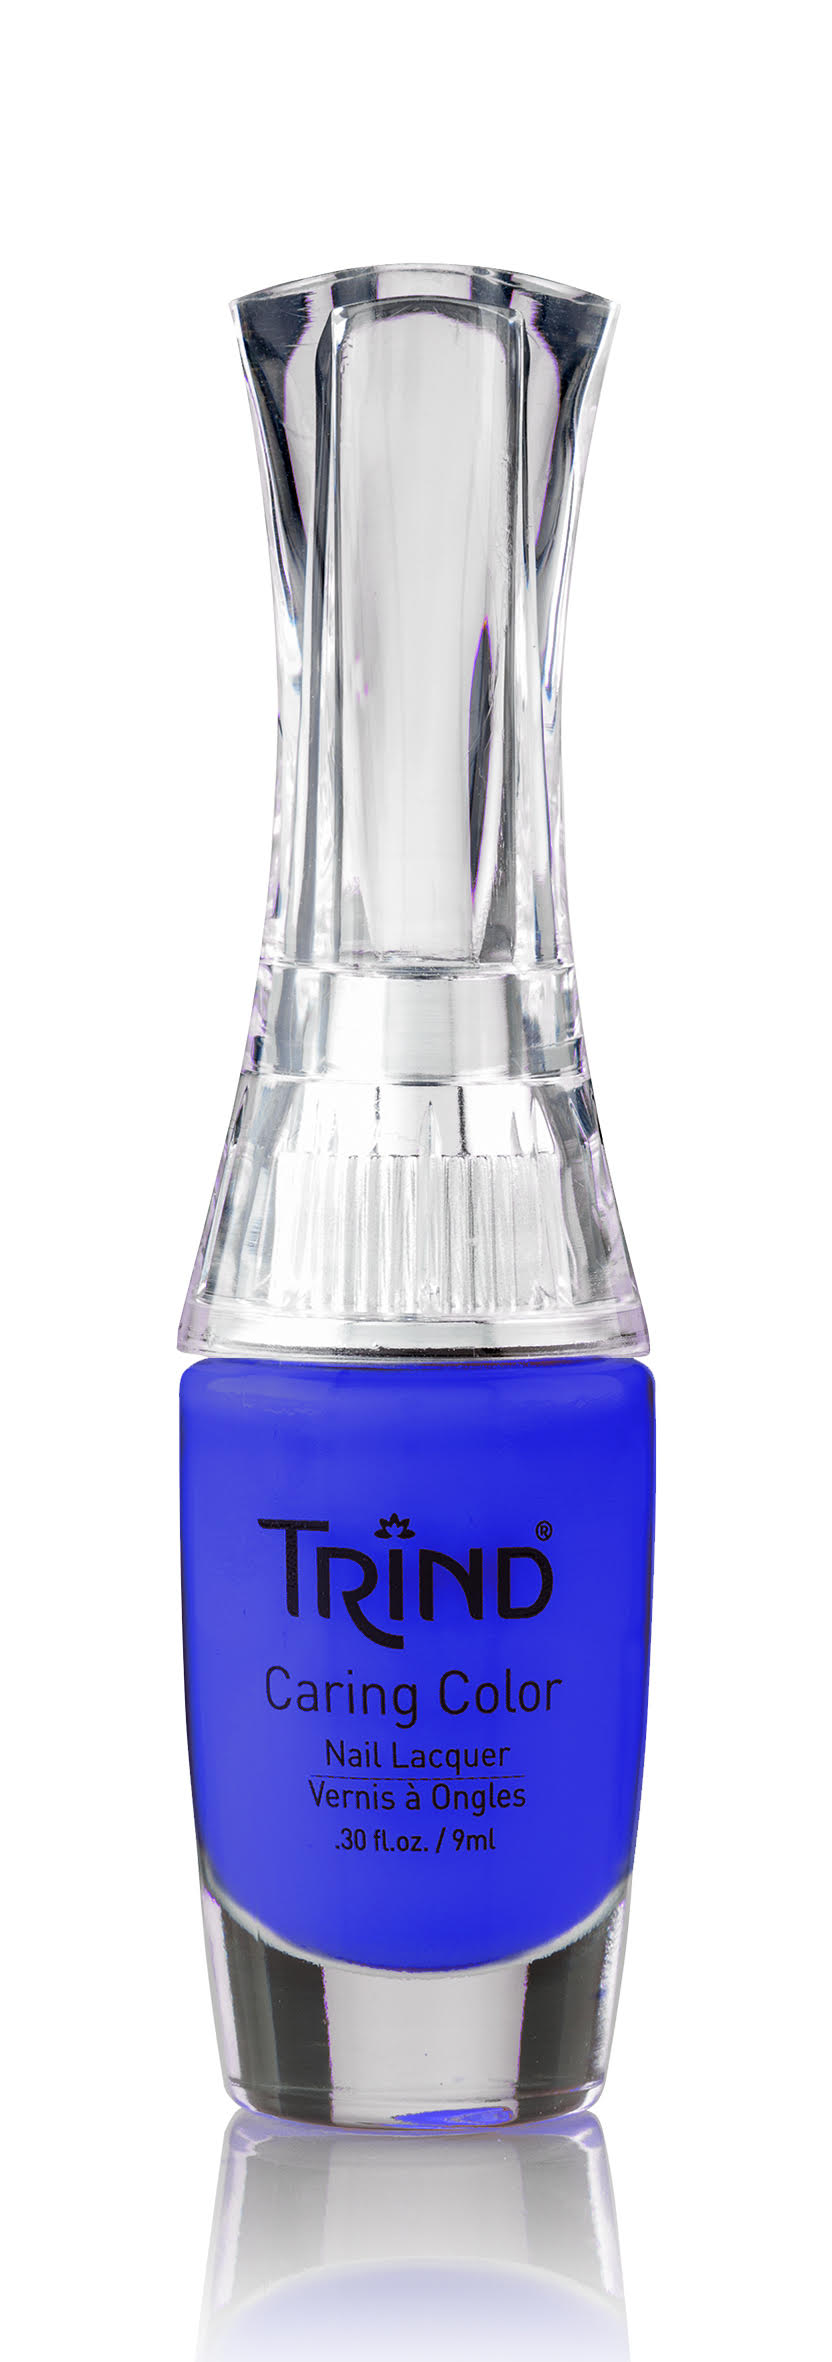 Trind Caring Color Nail Lacquer CC215